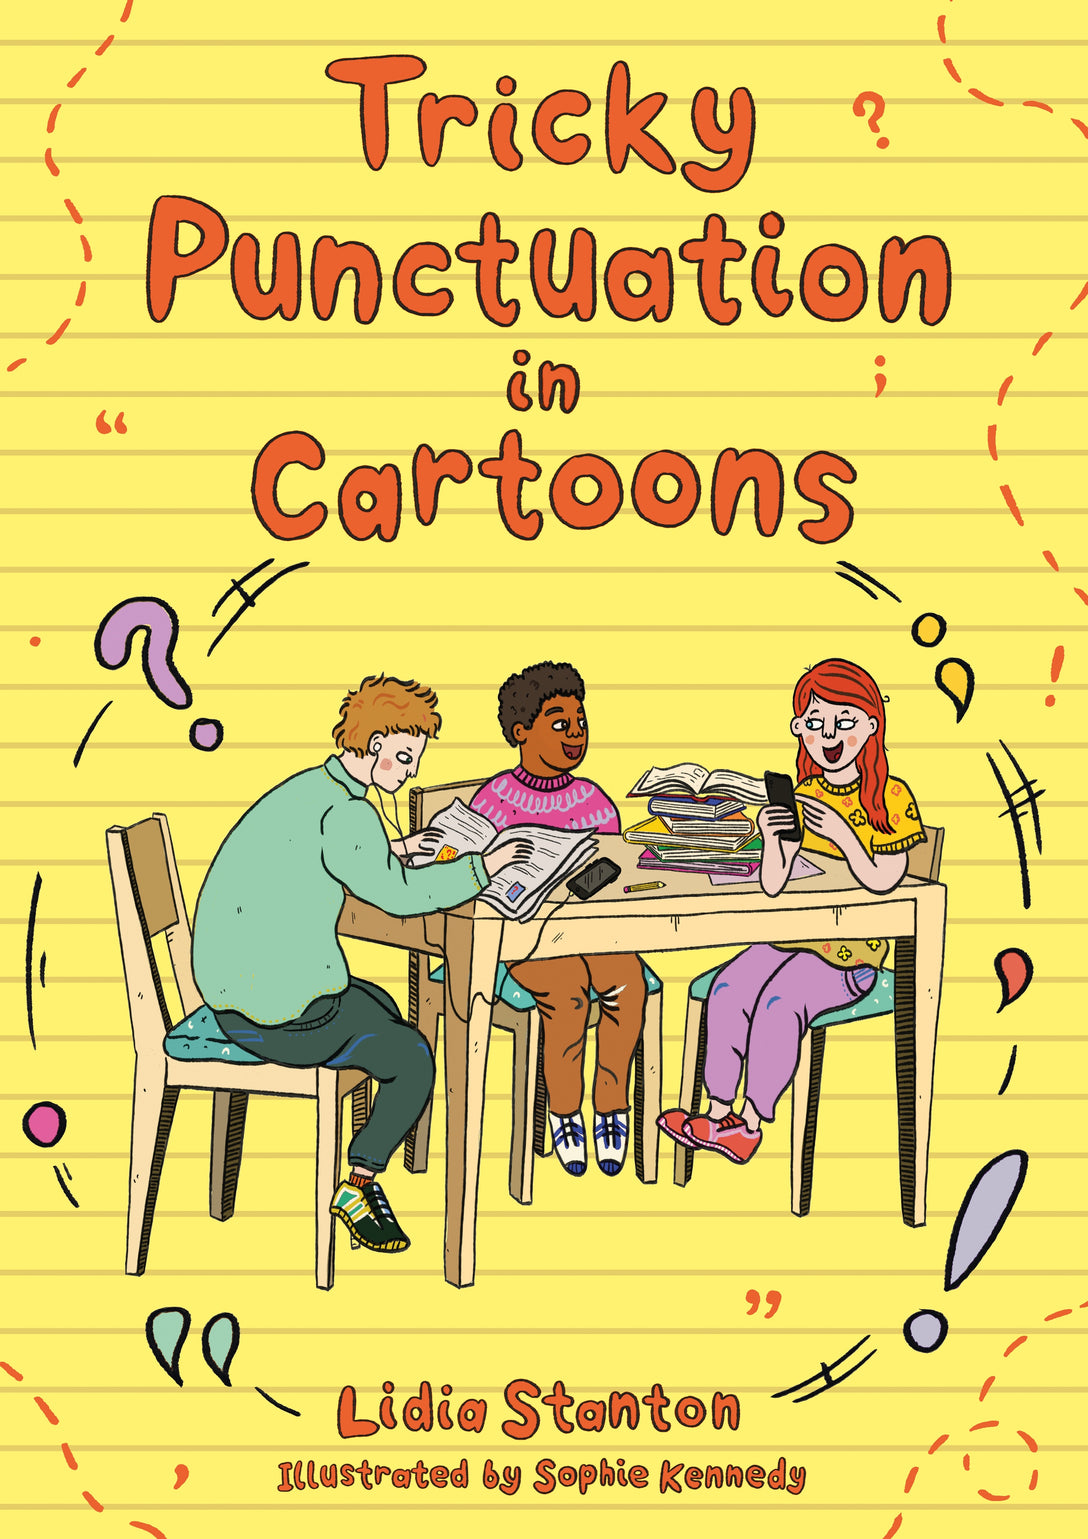 Tricky Punctuation in Cartoons by Lidia Stanton